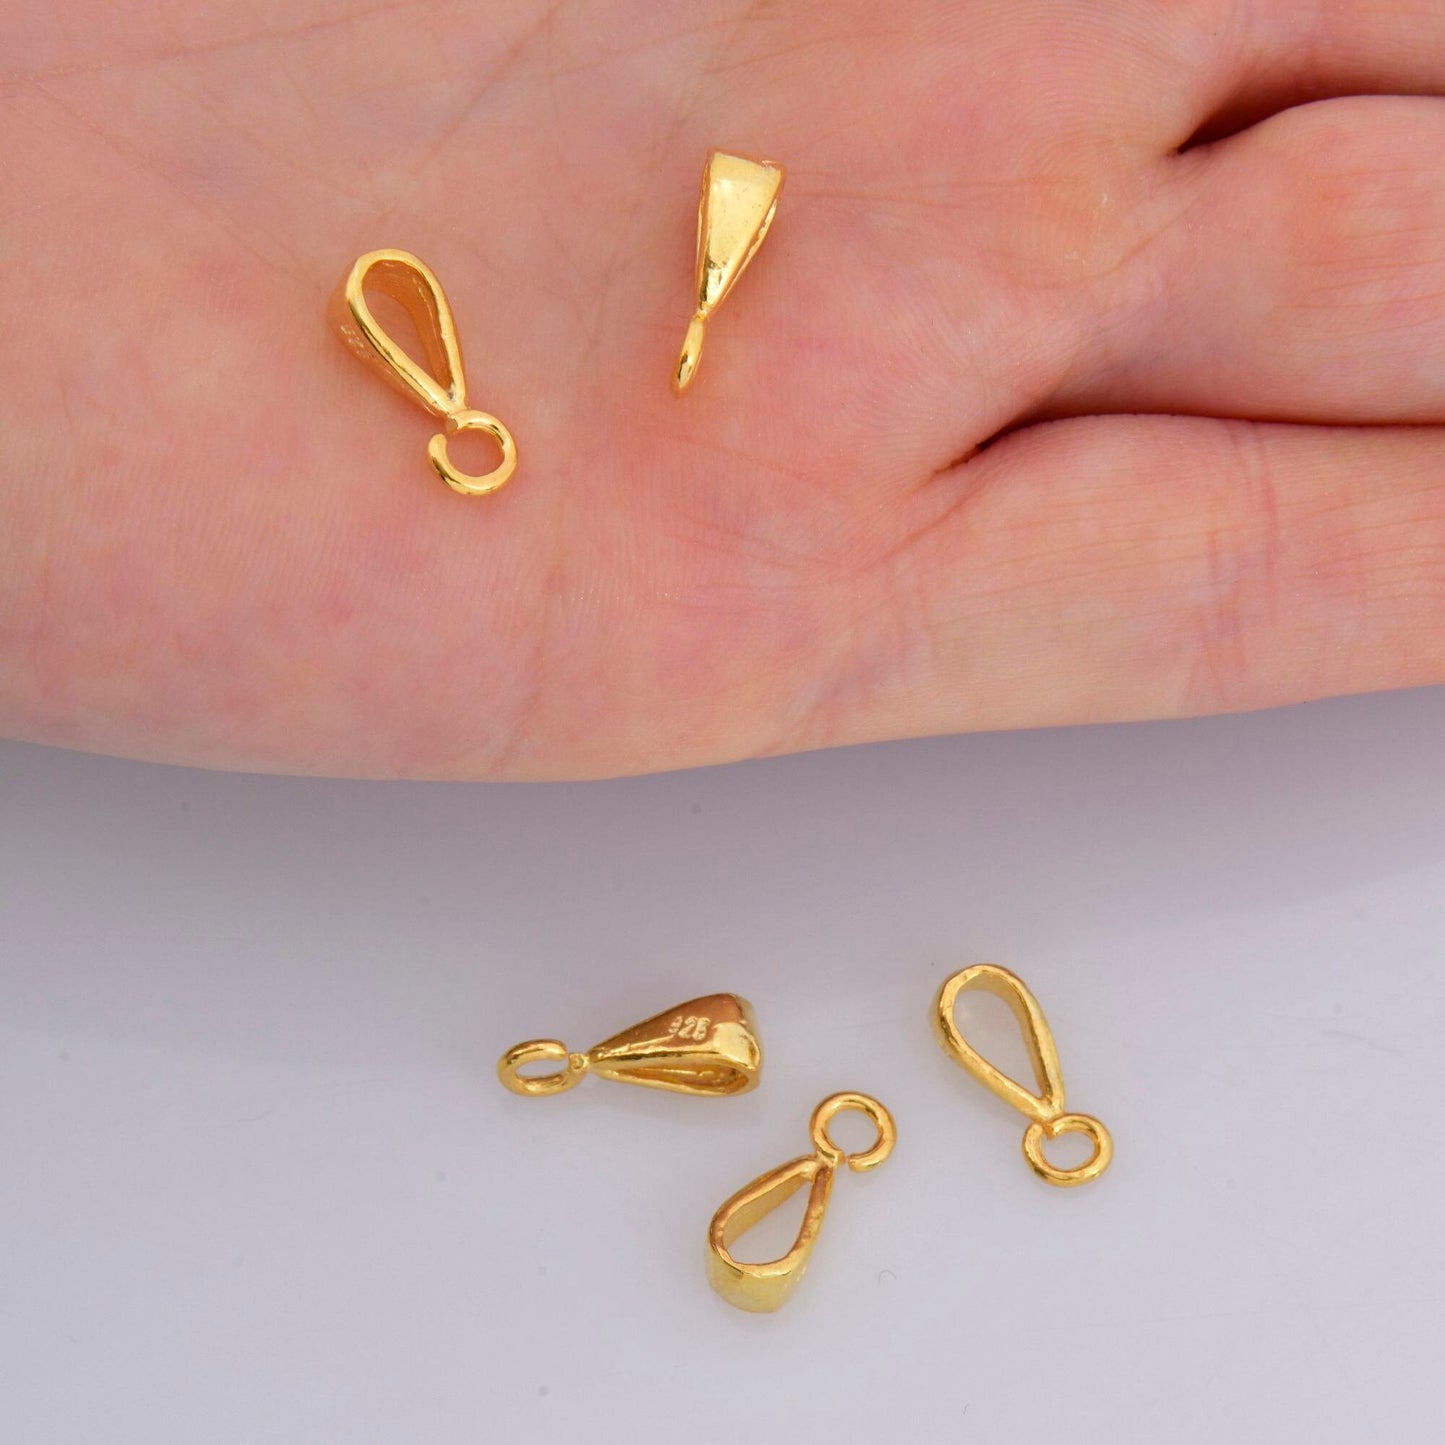 24K Gold Vermeil Bails with Open Loop, 24K Gold Plated Open Ring Bails, Smooth Silver Connector Bails, Bail Charms, Jewelry Findings, VM31